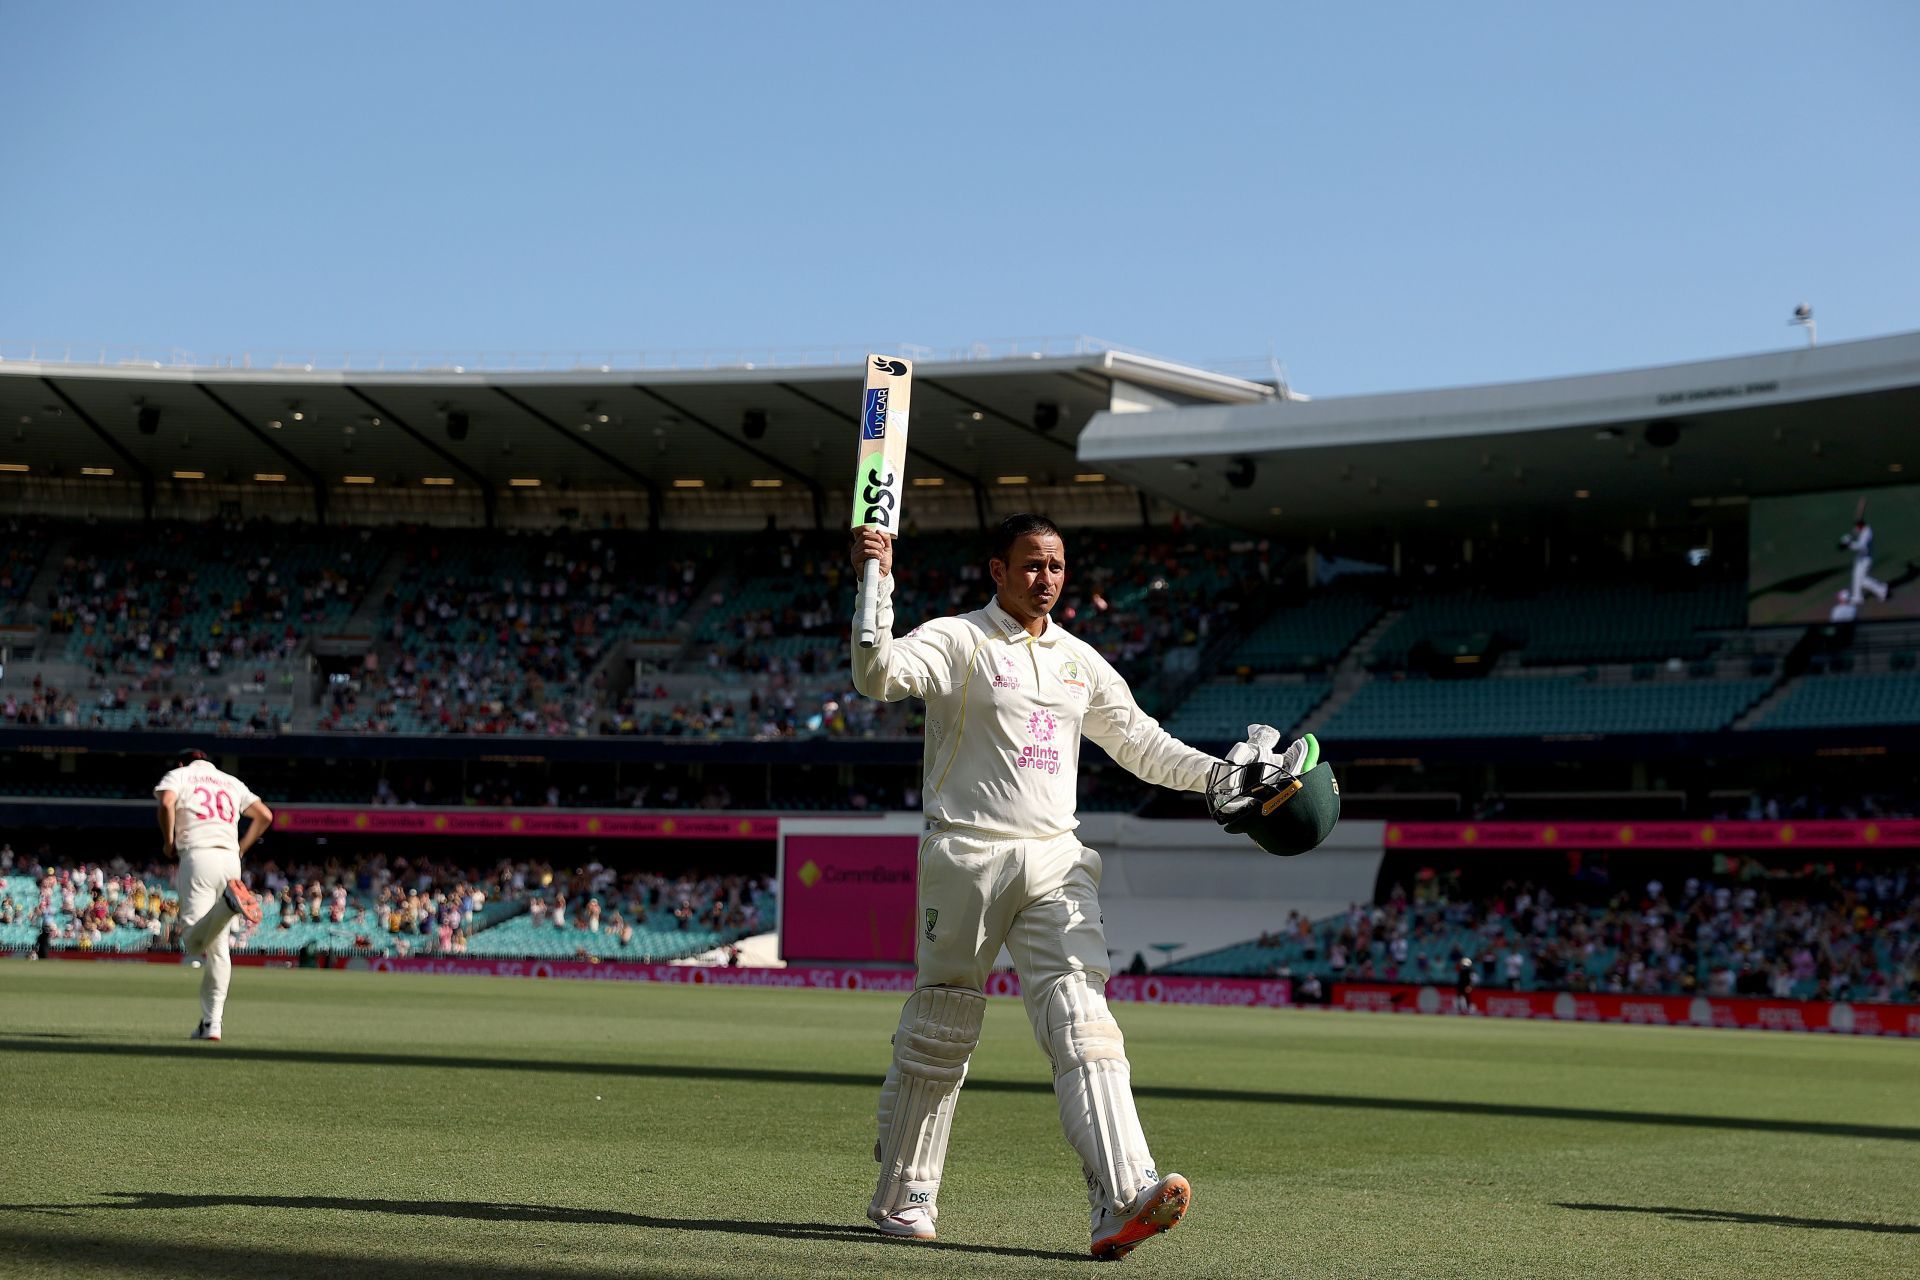 Khawaja remained unbeaten on 101 in the second innings